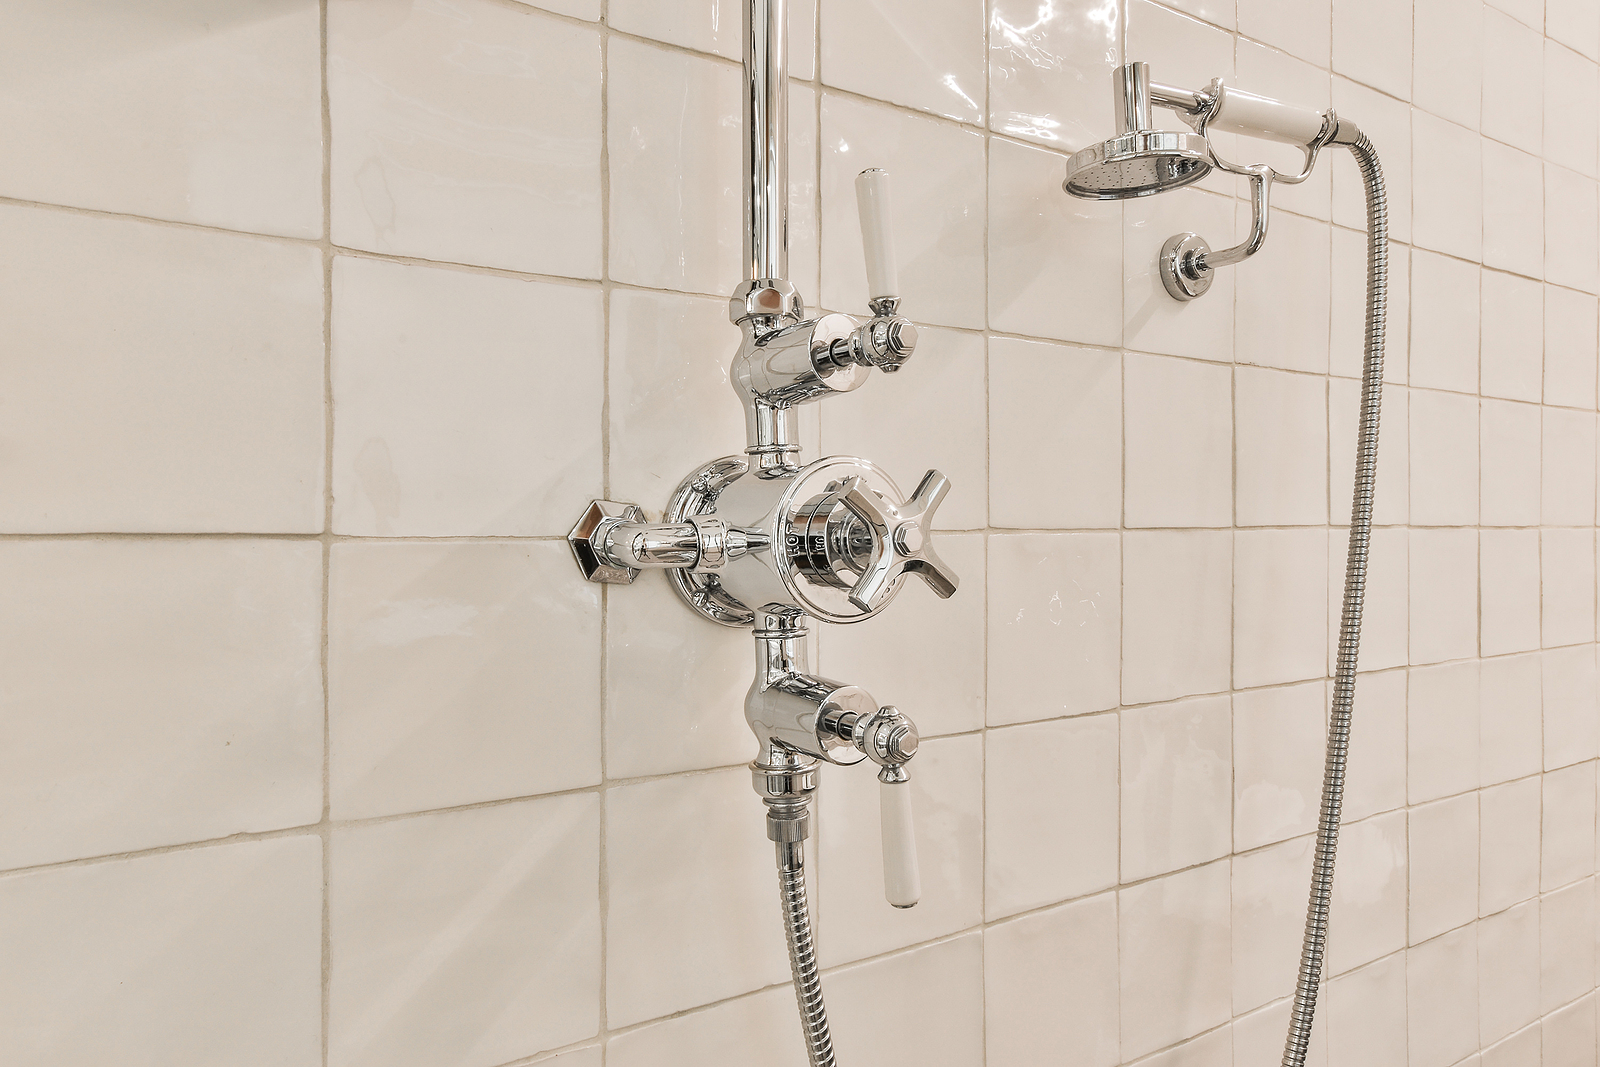 Instructions on How to Replace a Shower Valve